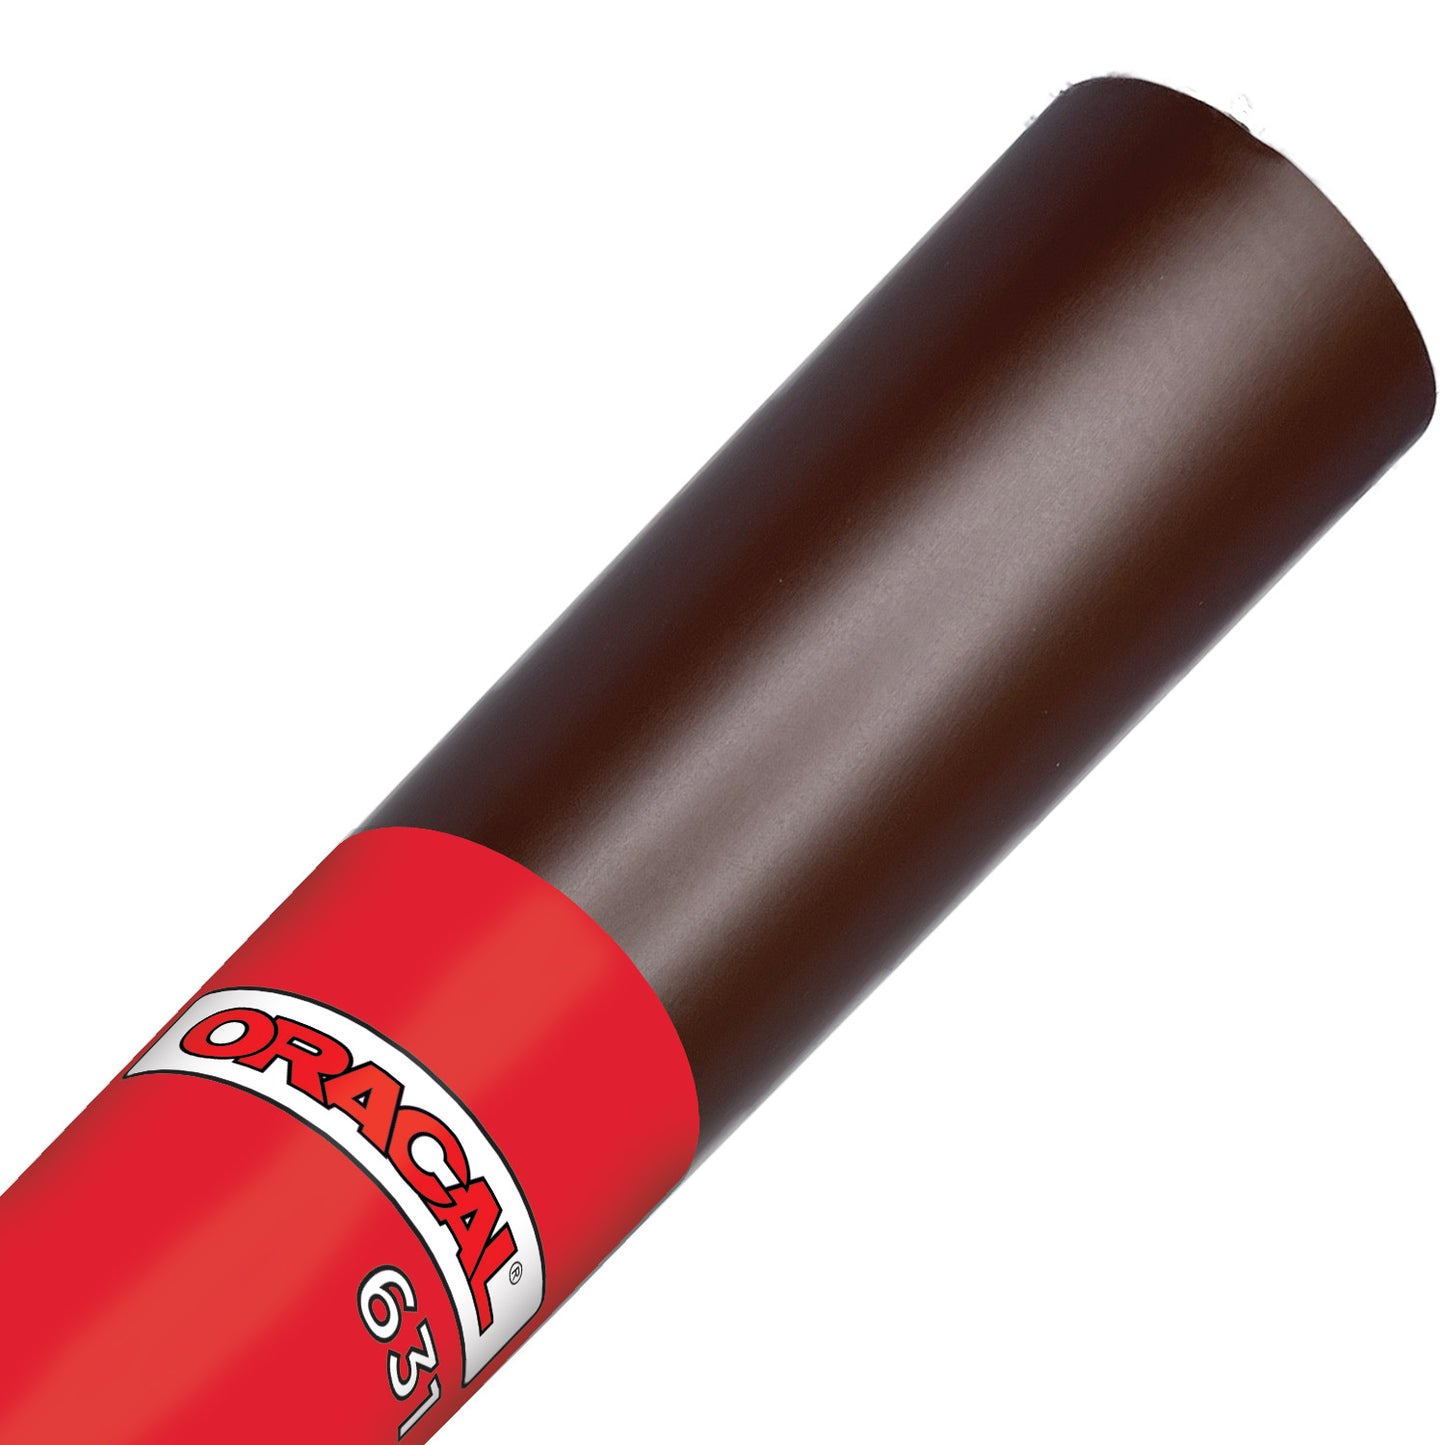 Brown ORACAL 631 Matte Removable Adhesive Vinyl Rolls